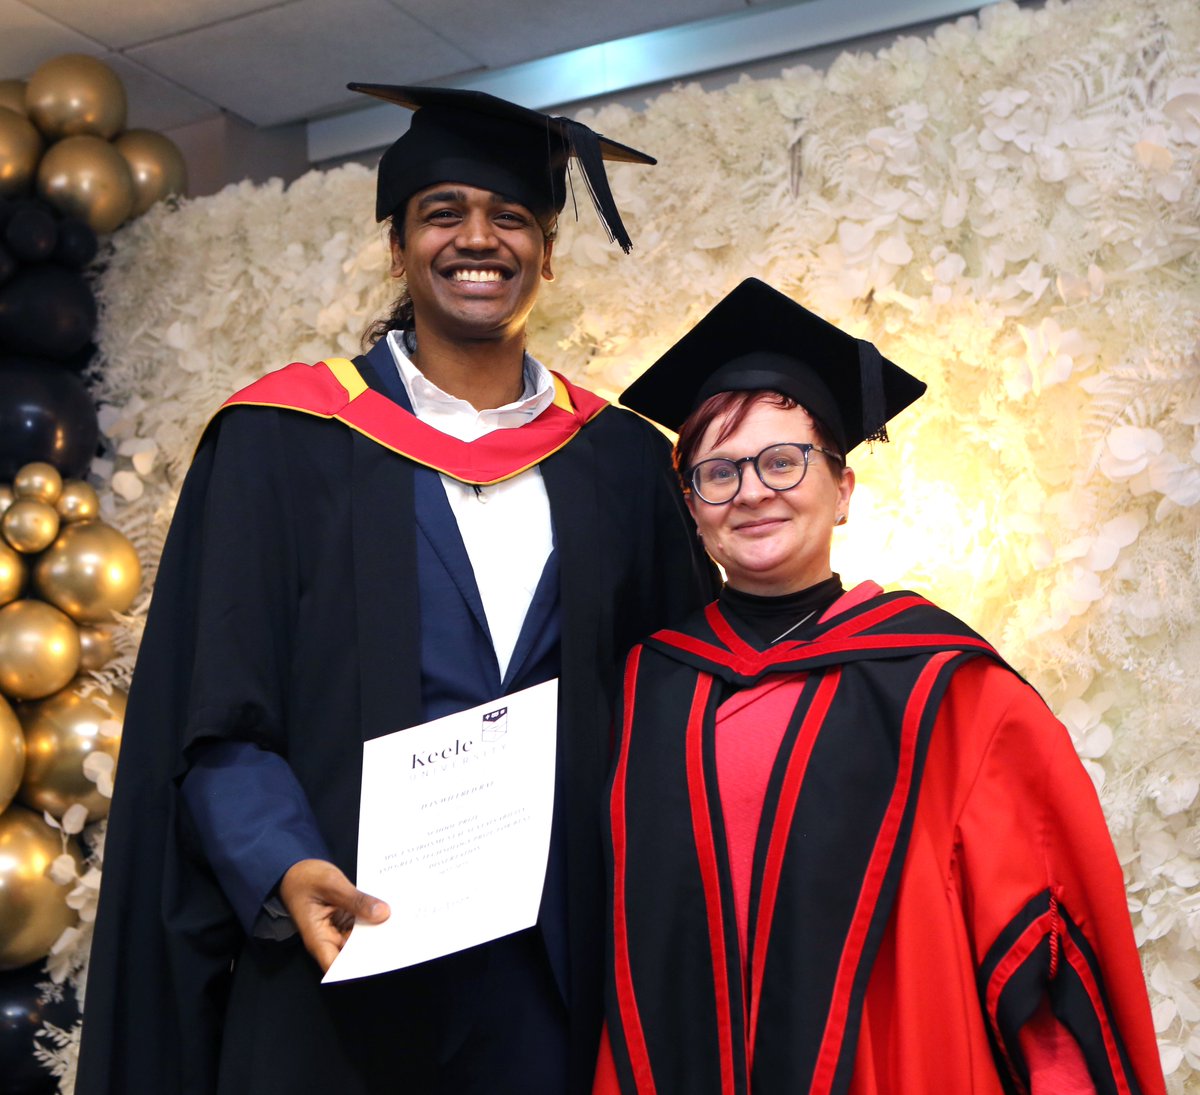 Congratulations to our school prize winners 👏👏👏 Chloe Virgo, Helen Naylor Burgess and Ivin Raj all scooped prizes for best MSc dissertation in their respective fields. #keelegraduation #ggegraduation #keeleuniversity #Graduation2024